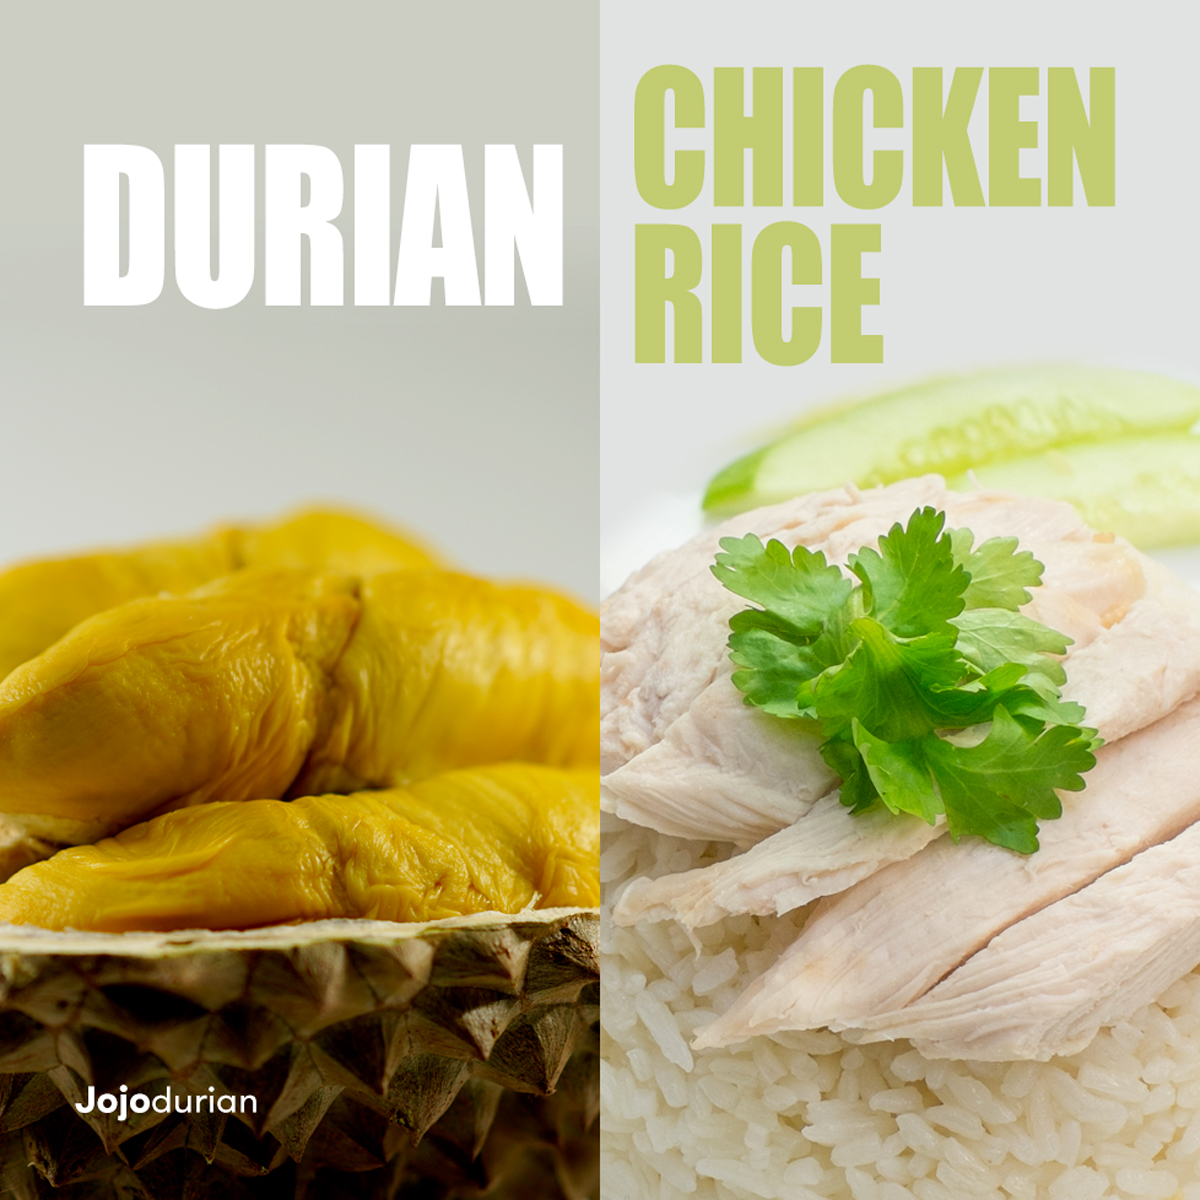 Meal Replacement durian chicken rice